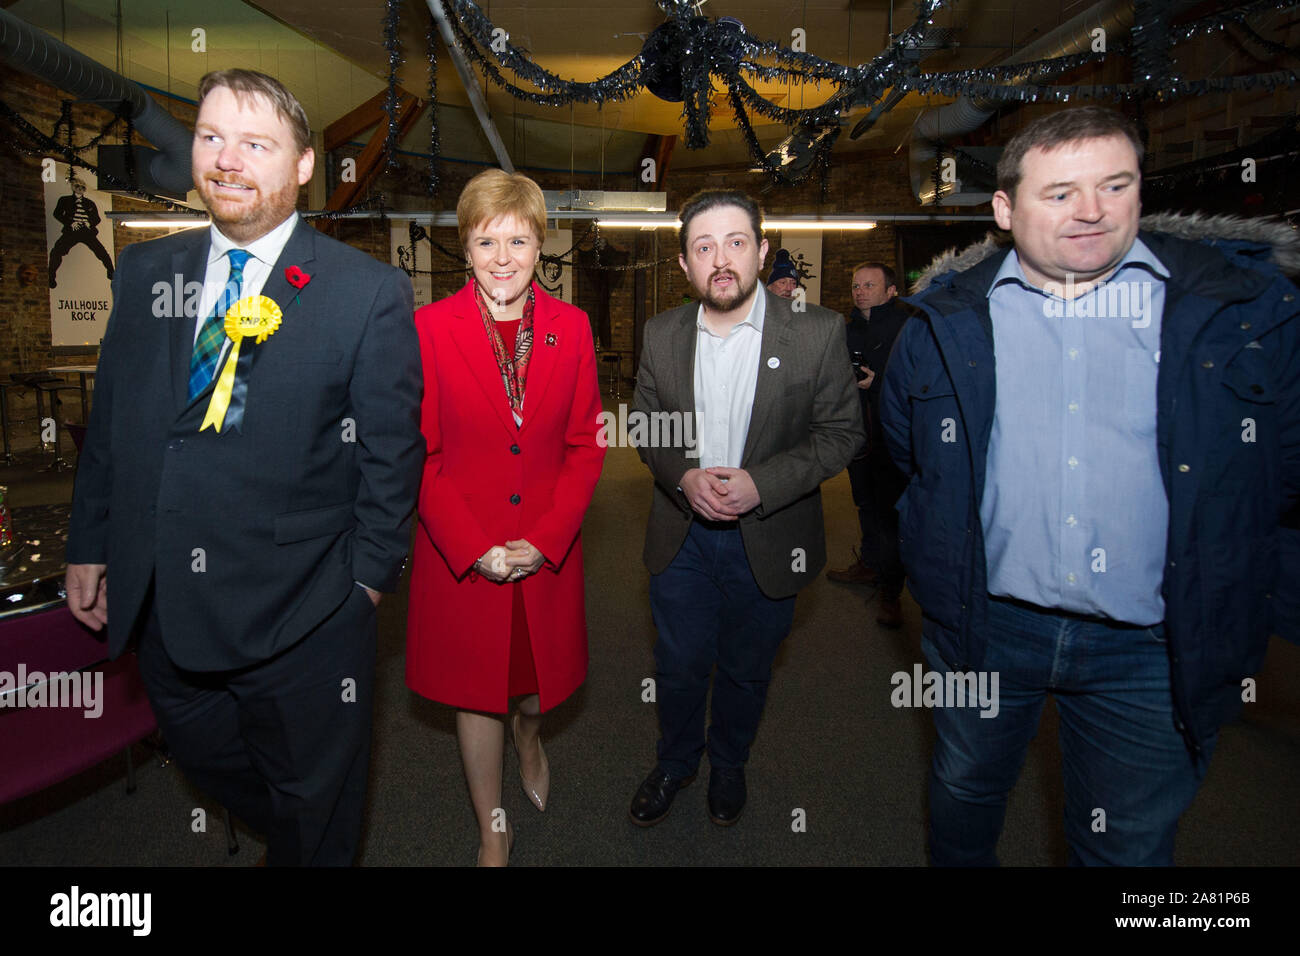 Dalkeith, UK. 5 November 2019. Pictured: (left) Owen Thompson; (right) Nicola Sturgeon MSP - First Minister of Scotland and Leader of the Scottish National Party (SNP).   First Minister Nicola Sturgeon joins Owen Thompson, SNP candidate for Midlothian, to campaign in Dalkeith. Speaking ahead of the visit, Nicola Sturgeon said: “Brexit is far from a done deal.”  “Even if Boris Johnson was to get his deal passed, that would only be the beginning – not the end – of trade talks with the EU.”     Credit: Colin Fisher/Alamy Live News. Stock Photo